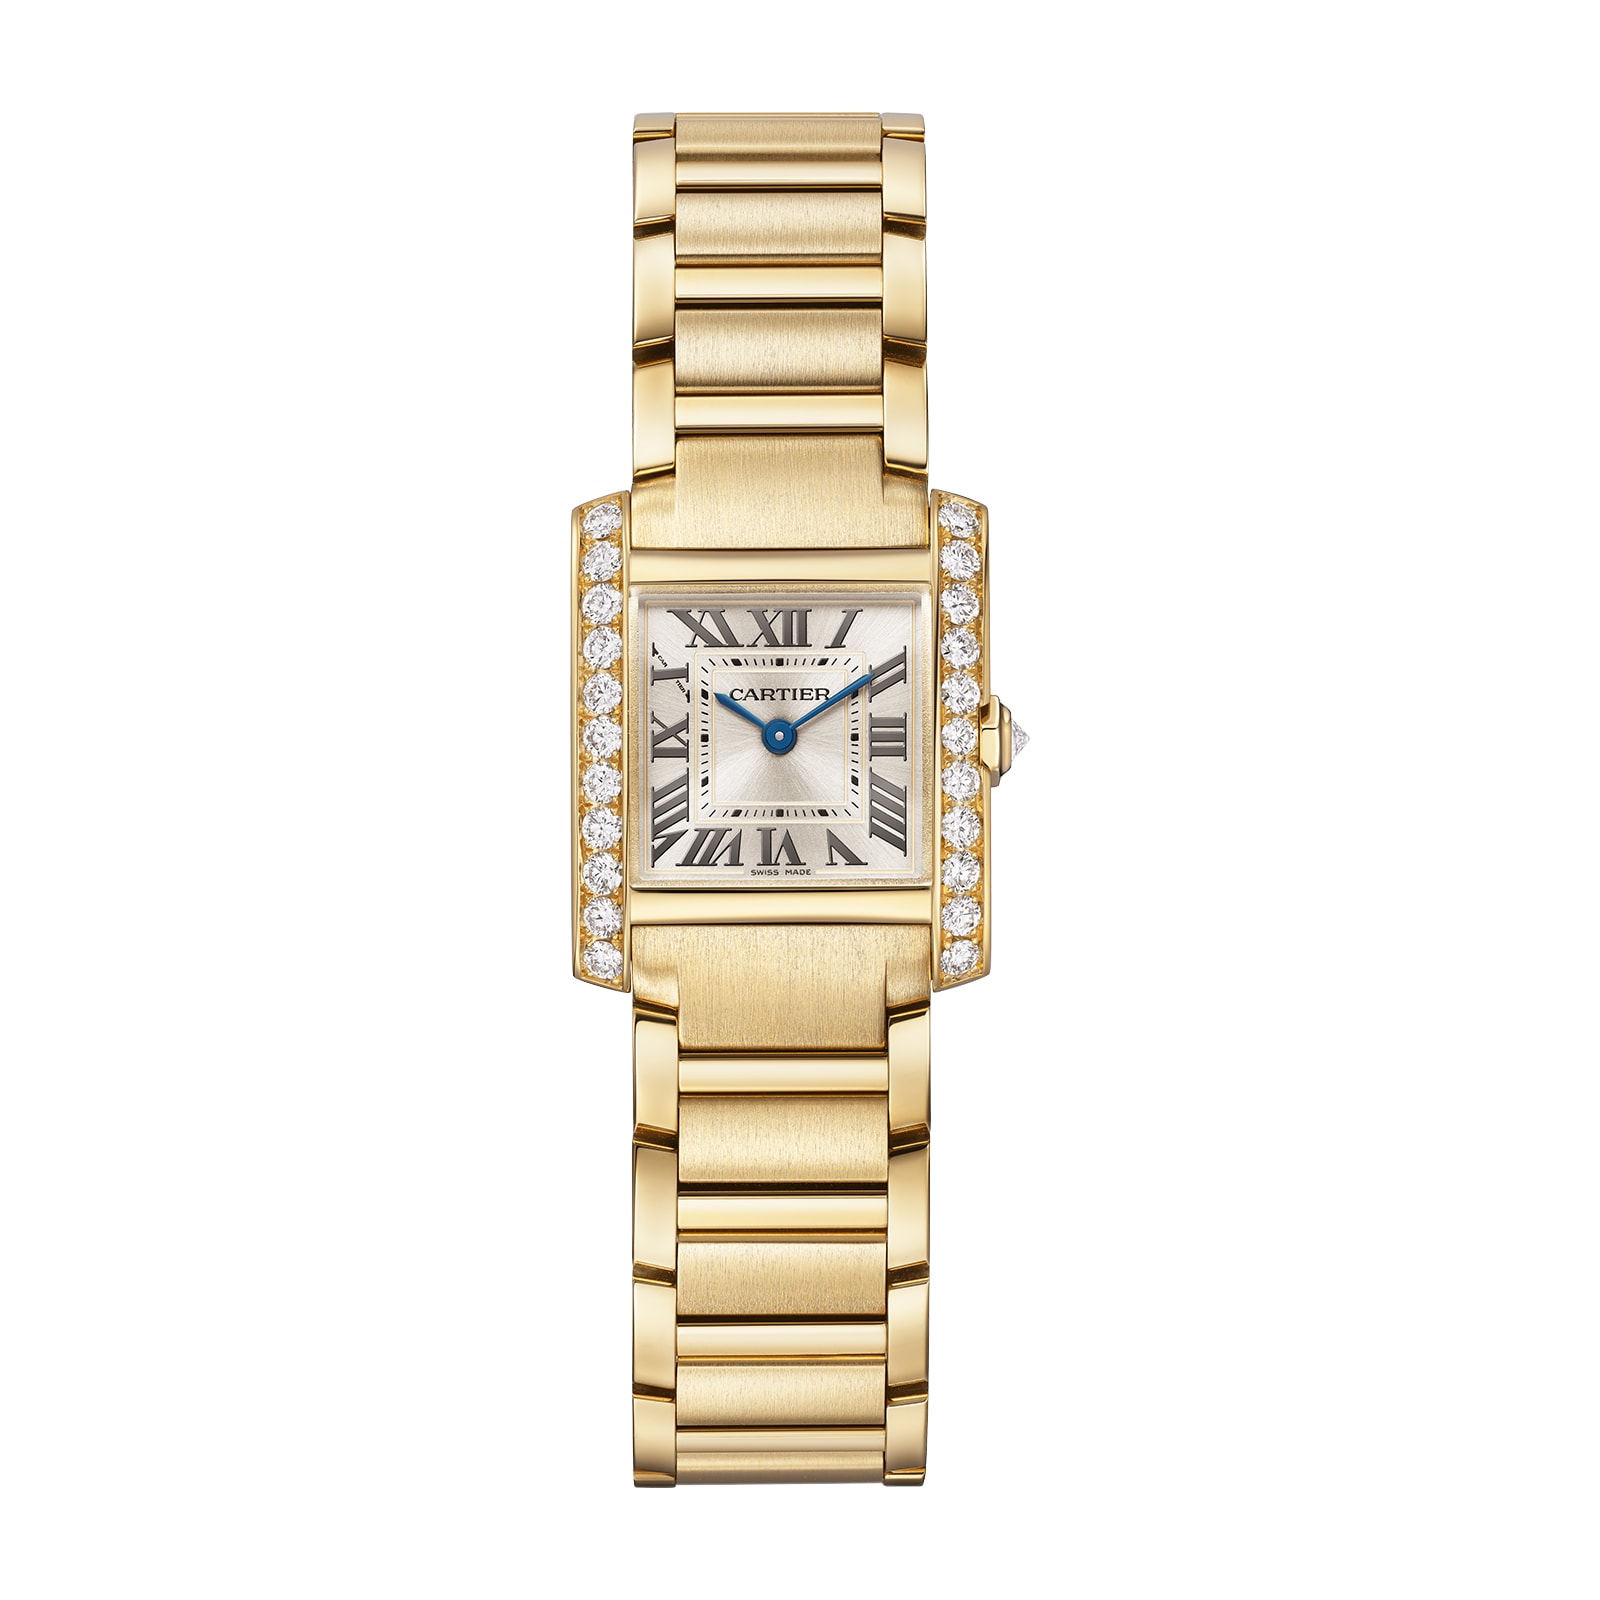 Cartier Tank Francaise Watch with Diamonds, Small